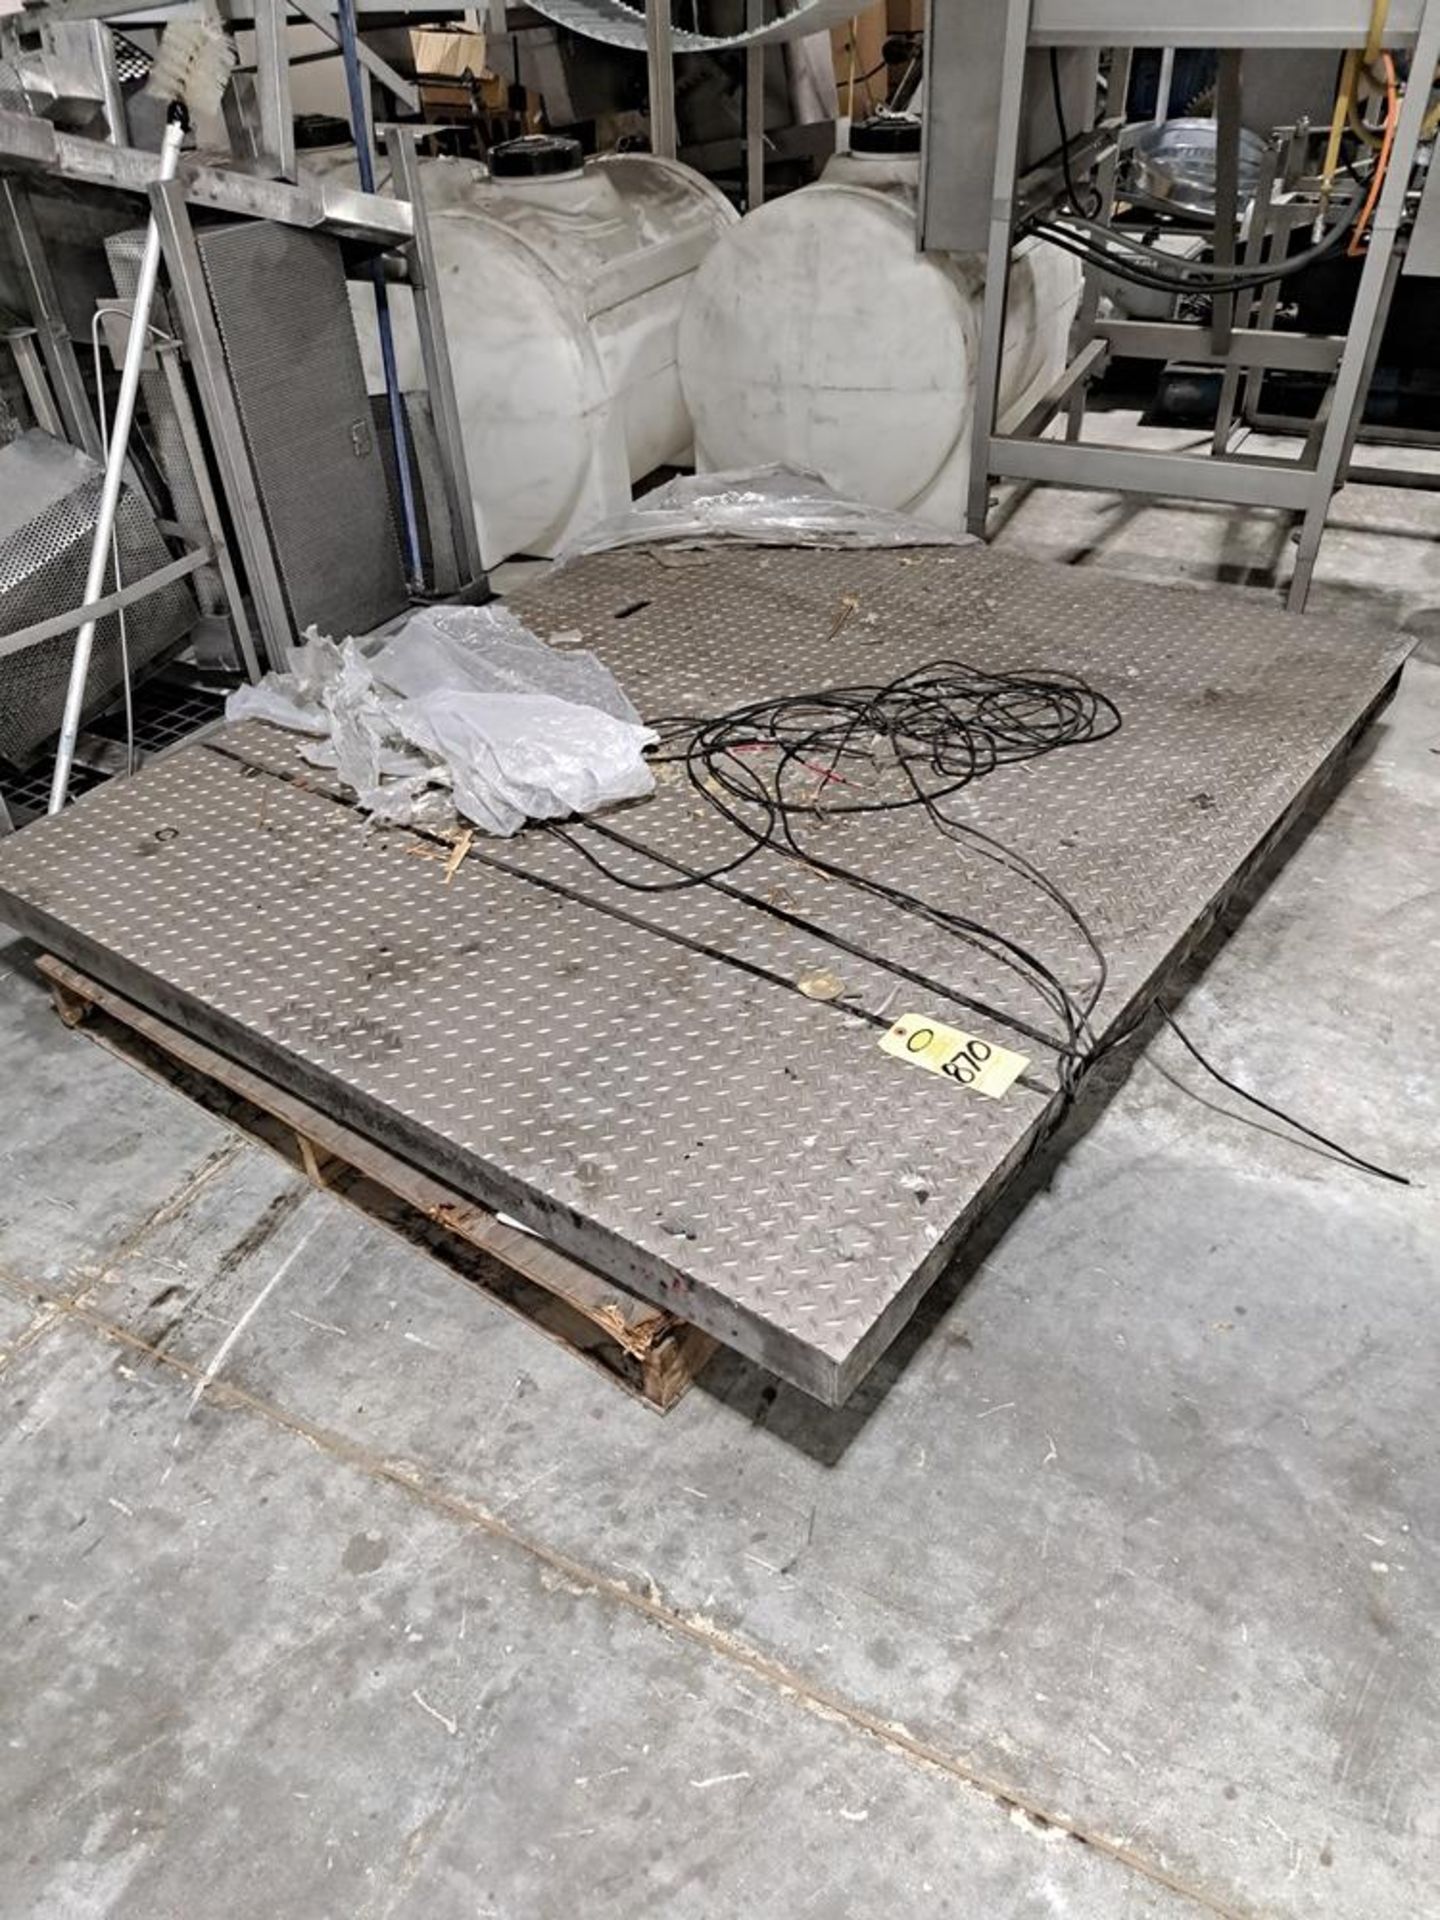 Stainless Steel Floor Scale Platform, 6' W X 5' L: Required Loading Fee $200.00, Rigger-Norm